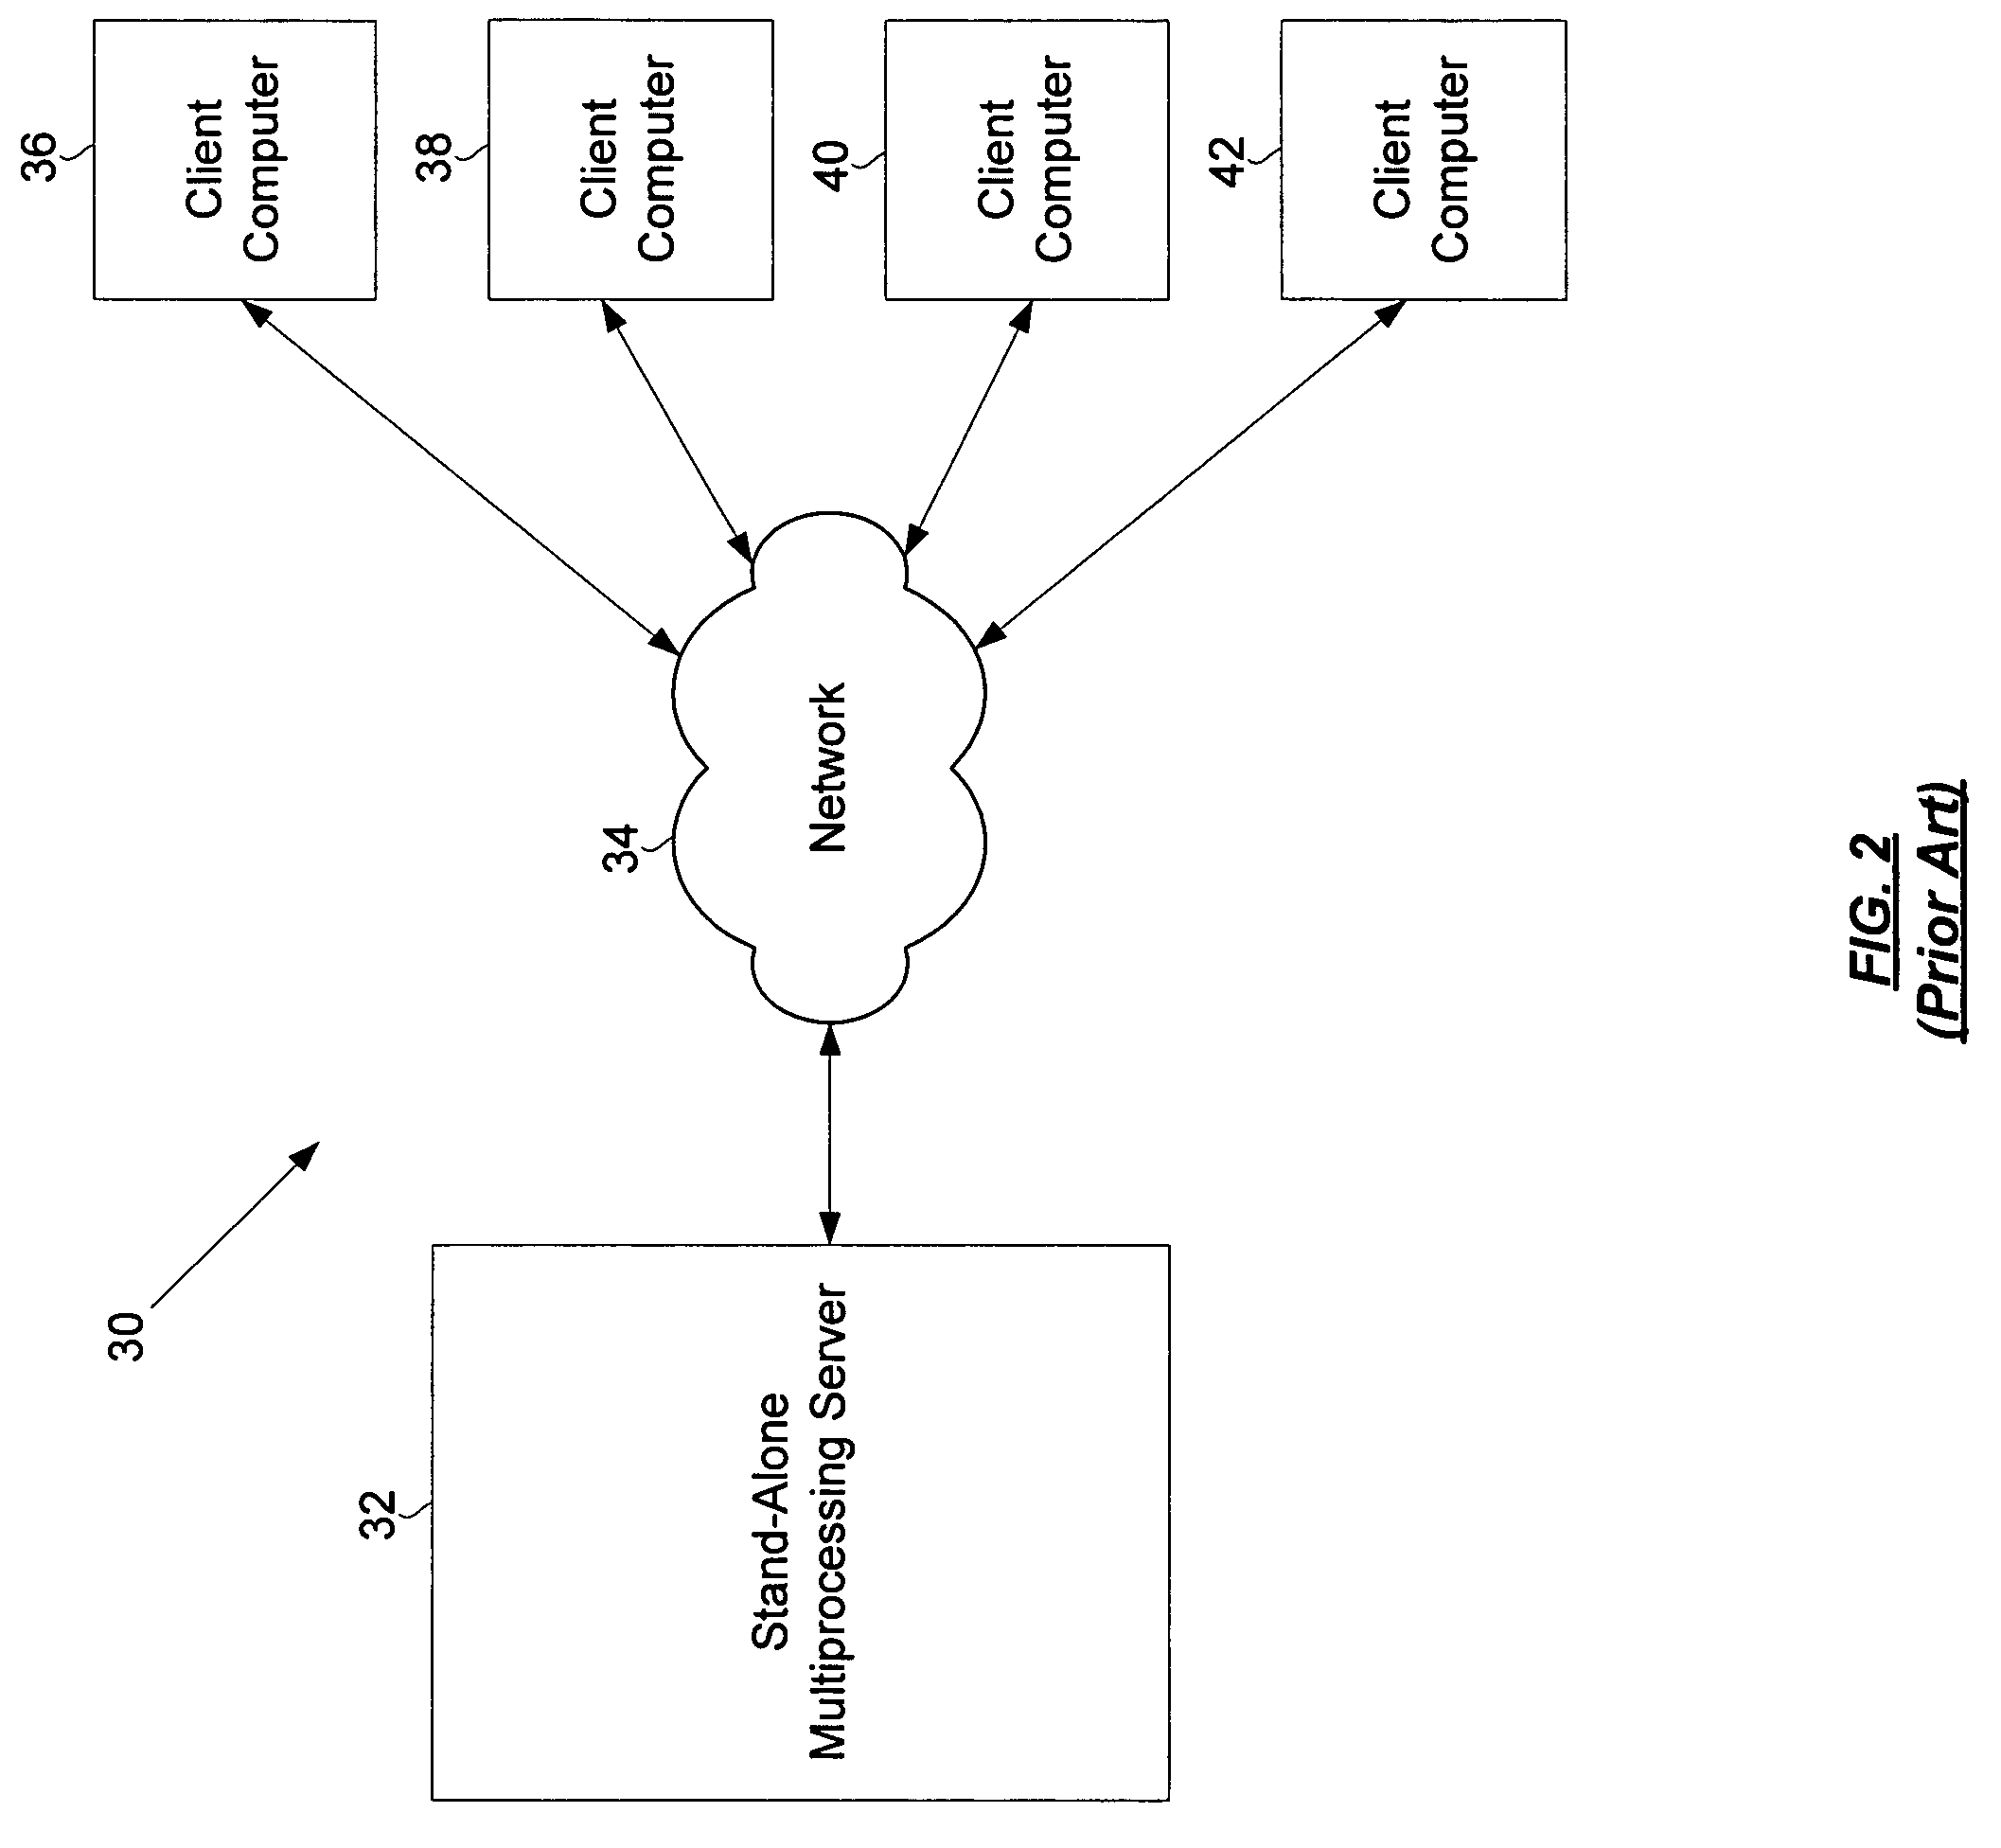 Conservative shadow cache support in a point-to-point connected multiprocessing node